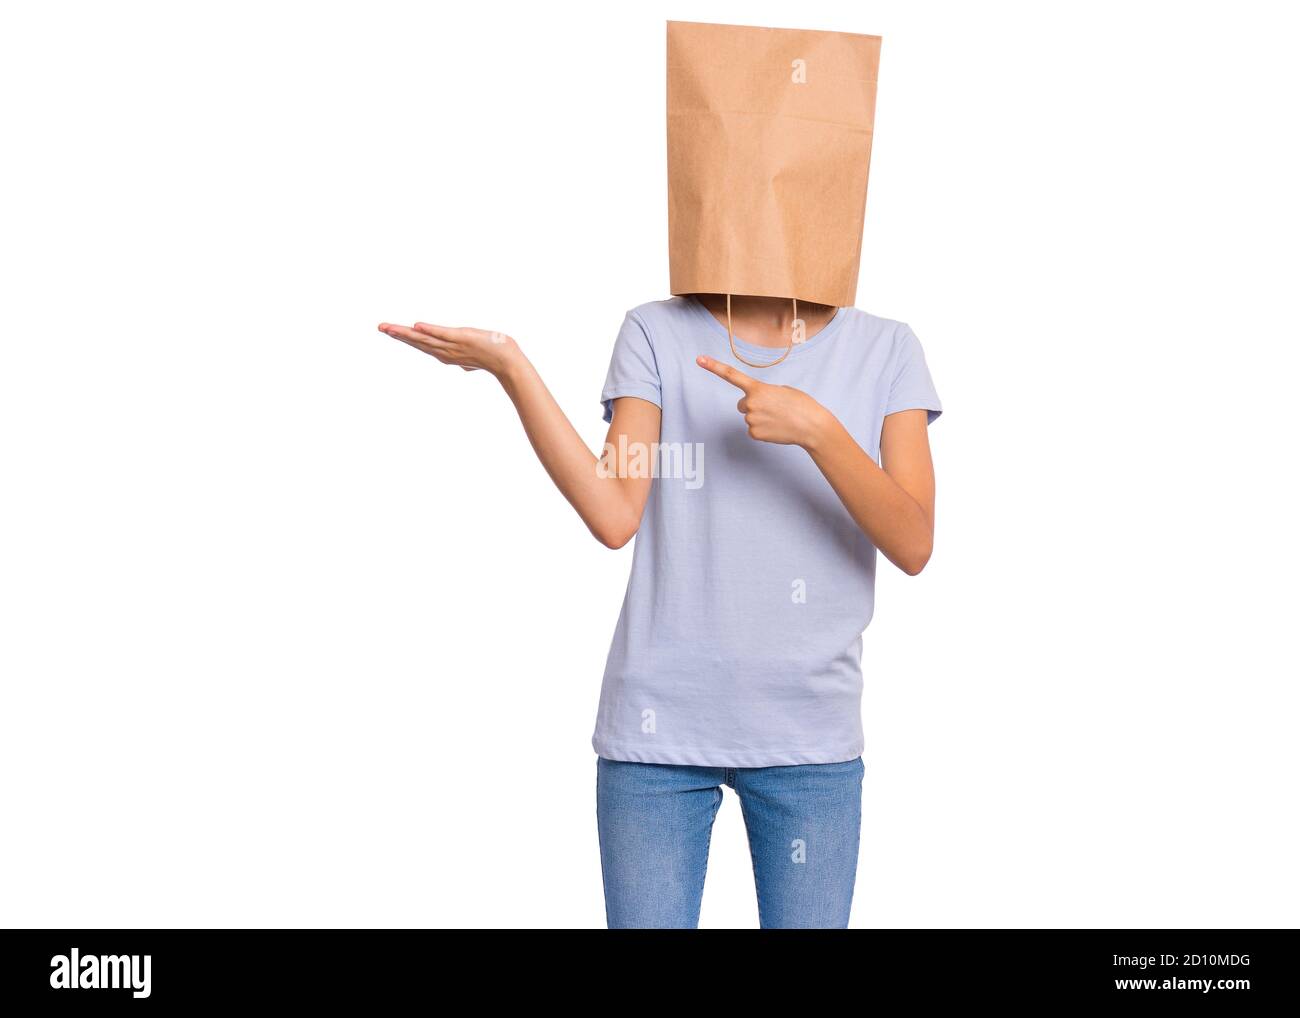 Girl with paper bag over head Stock Photo